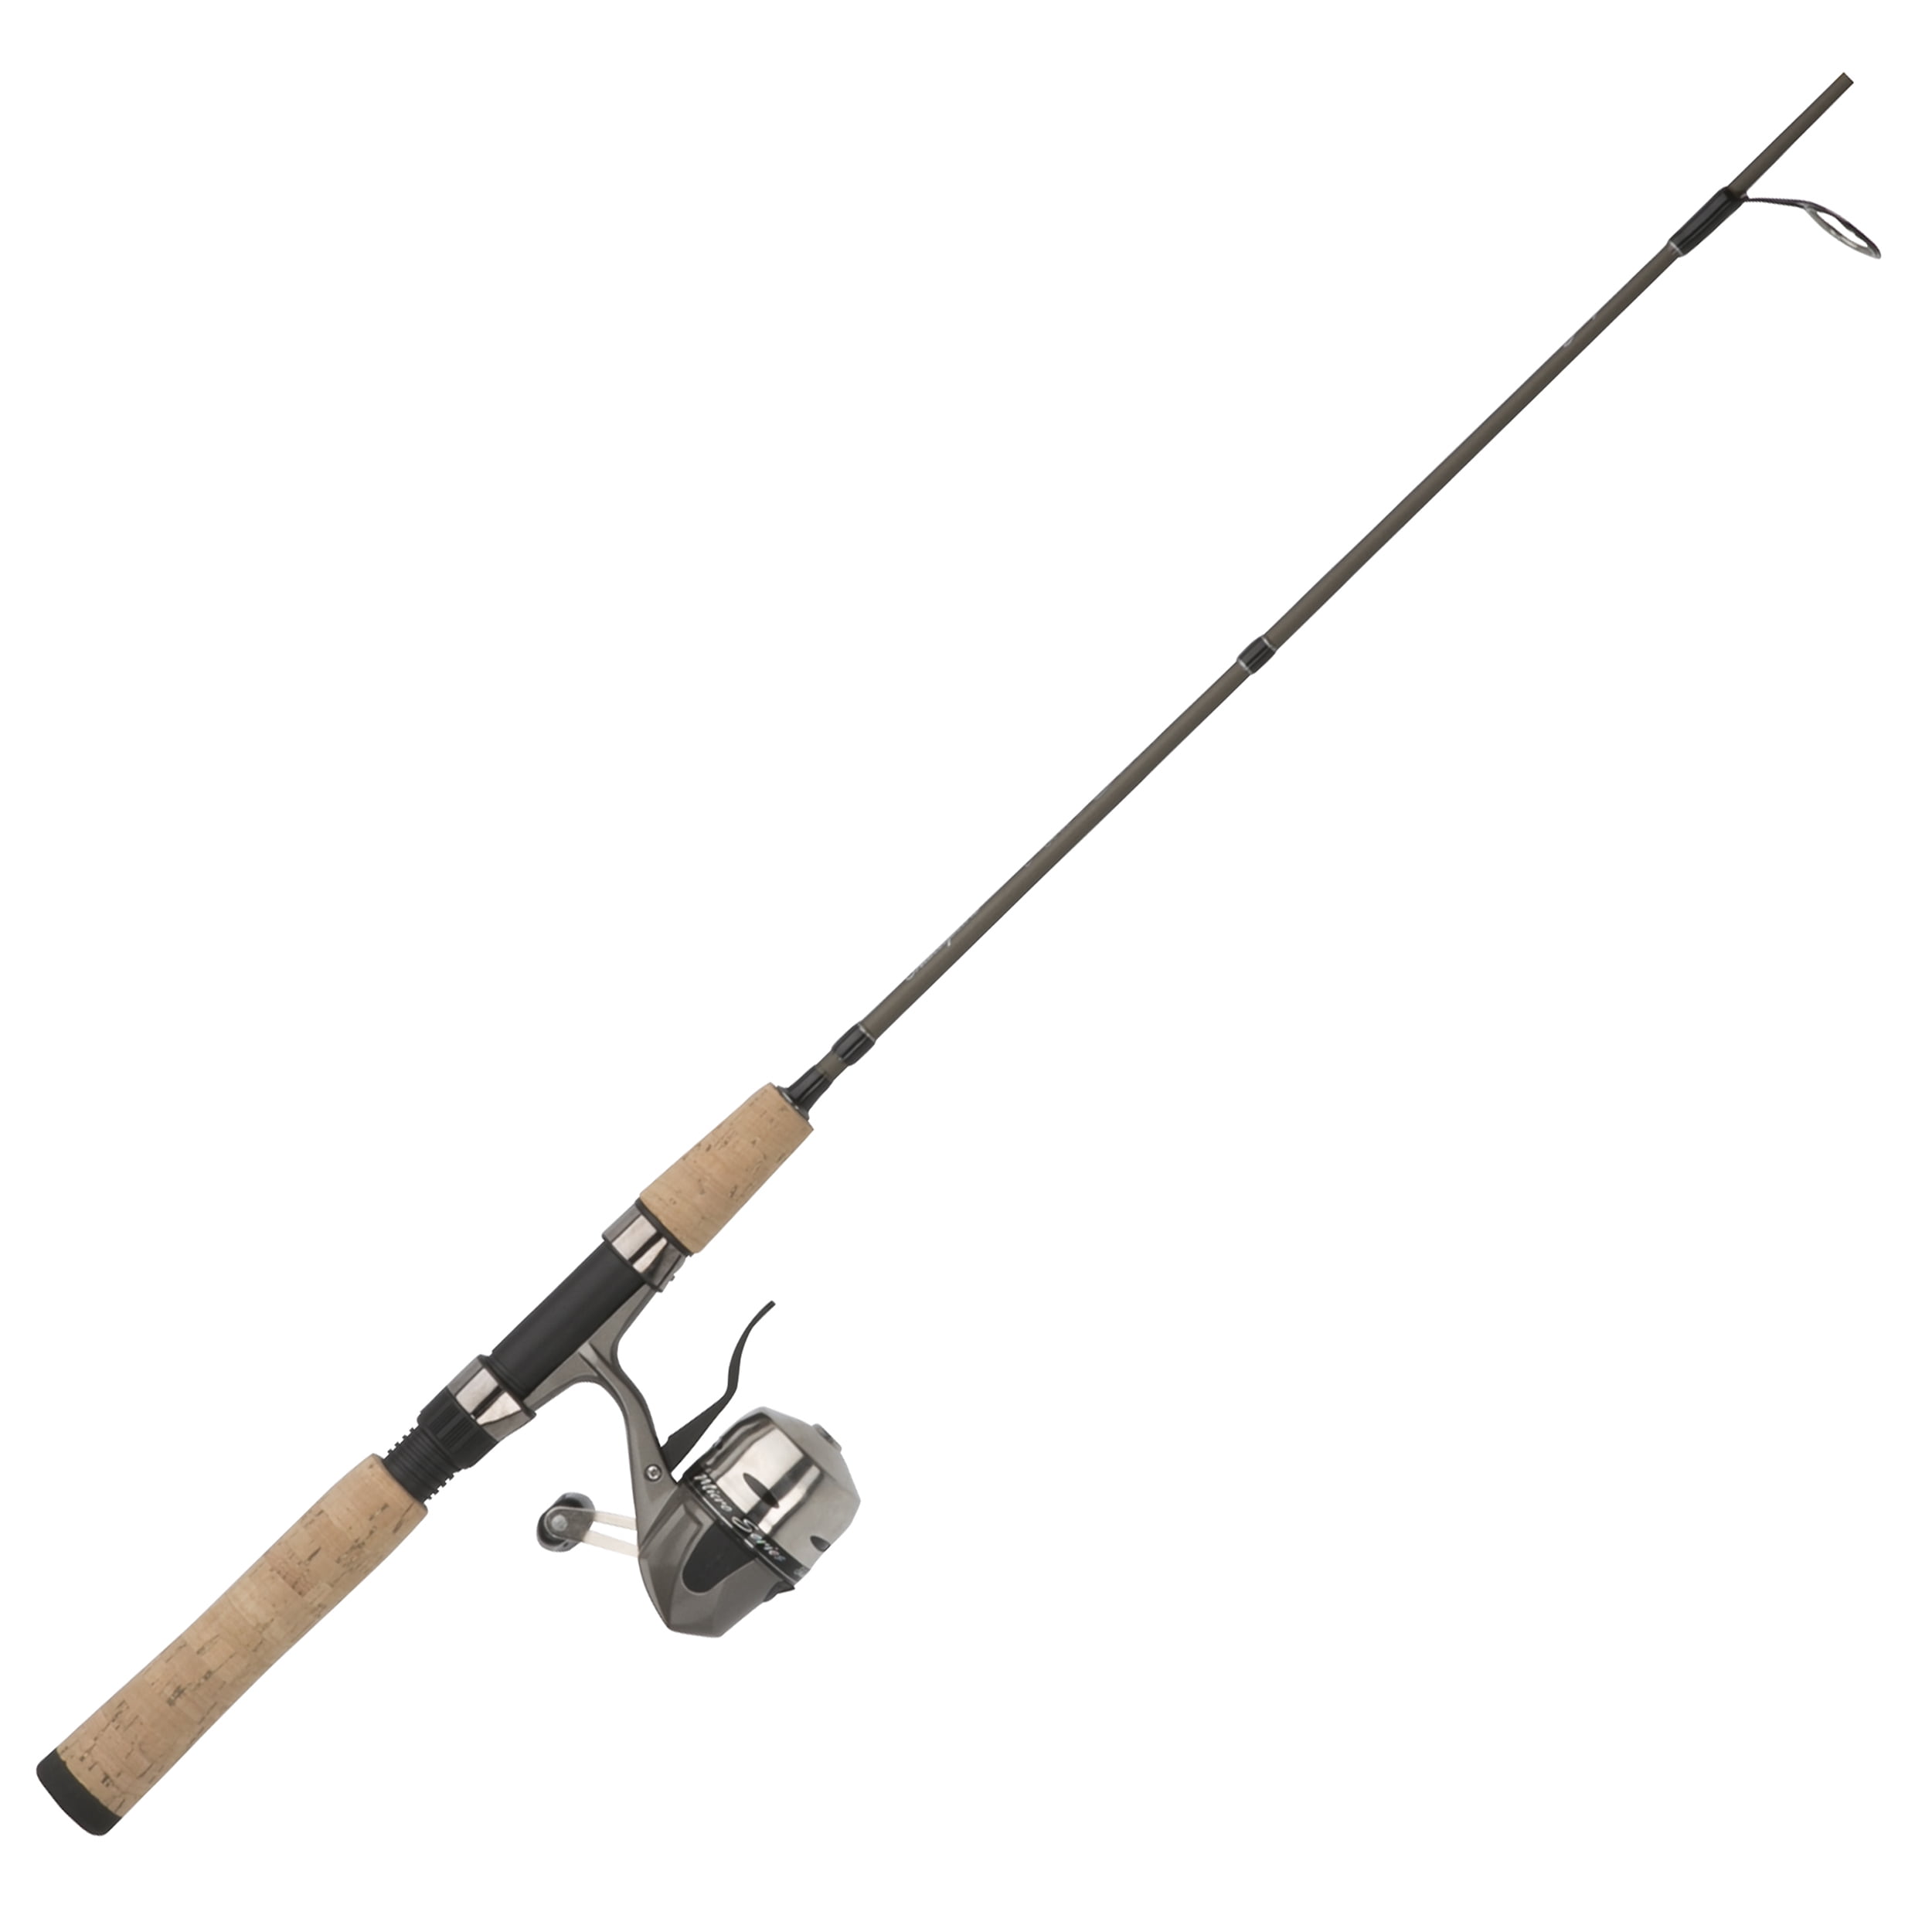 Shakespeare micro series 7ft fishing rod at Rs 1950/piece, Fishing Rods in  Kanpur